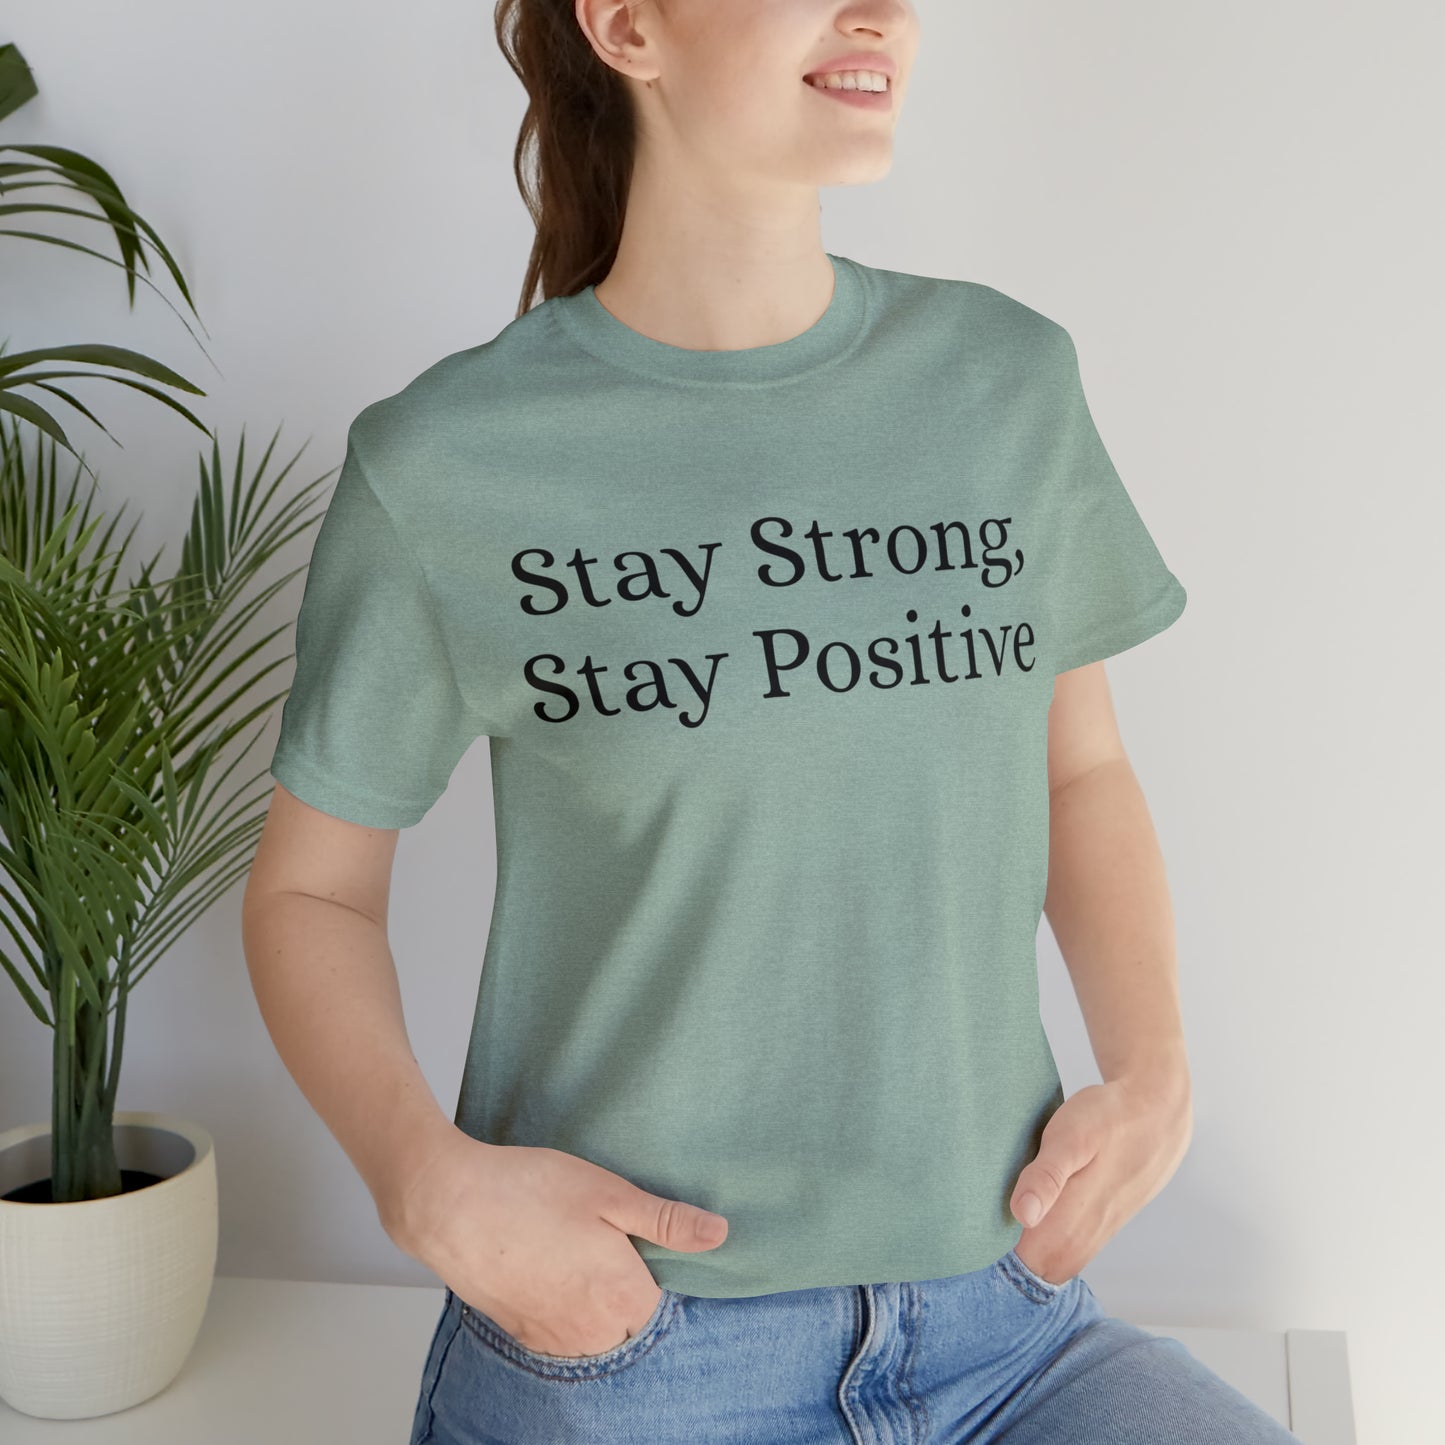 Stay Strong, Stay Positive